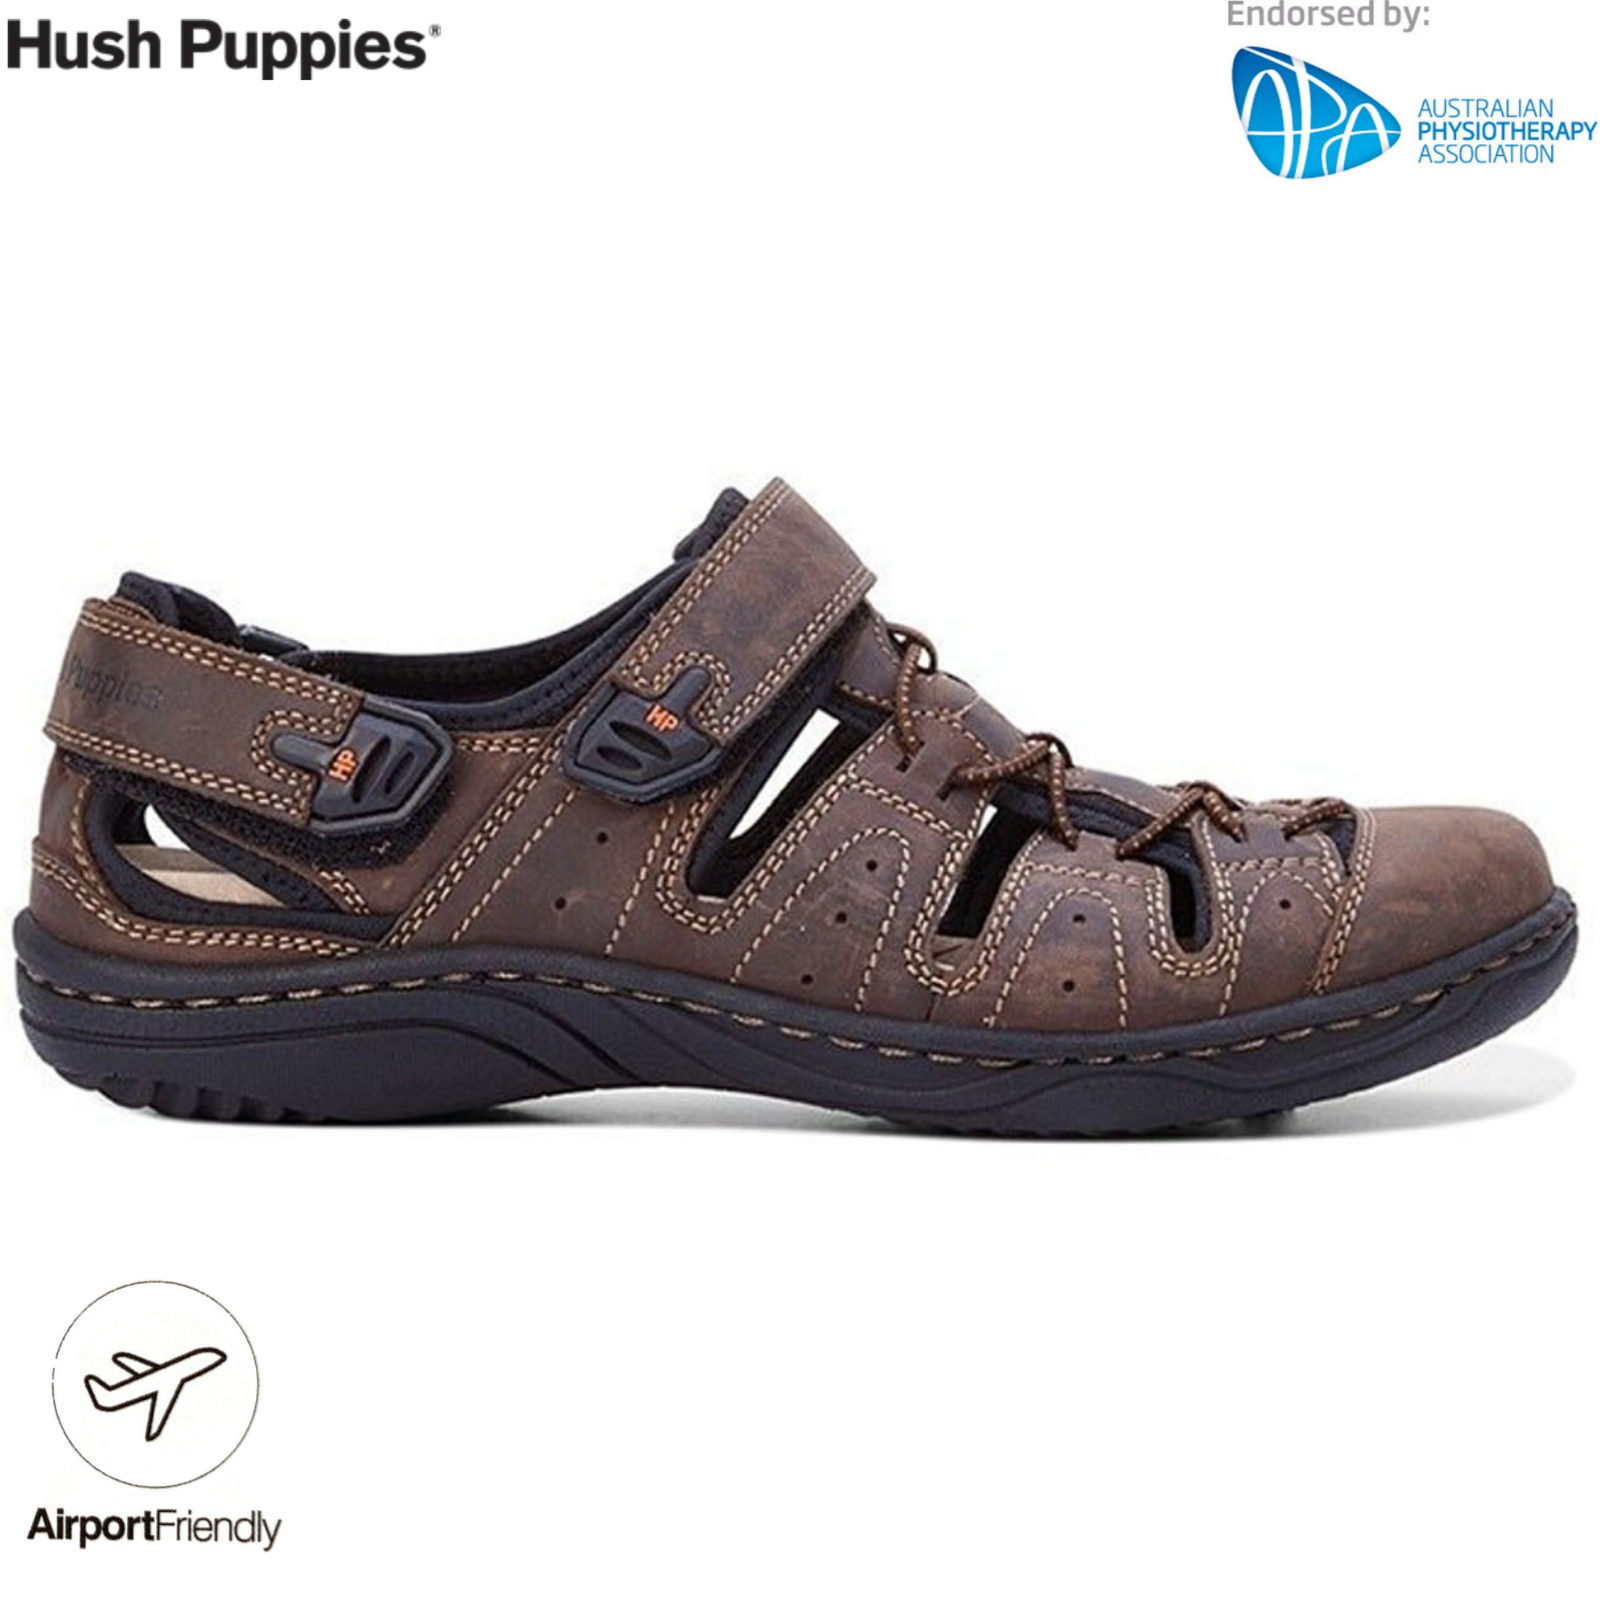 hush puppies anderson sandals